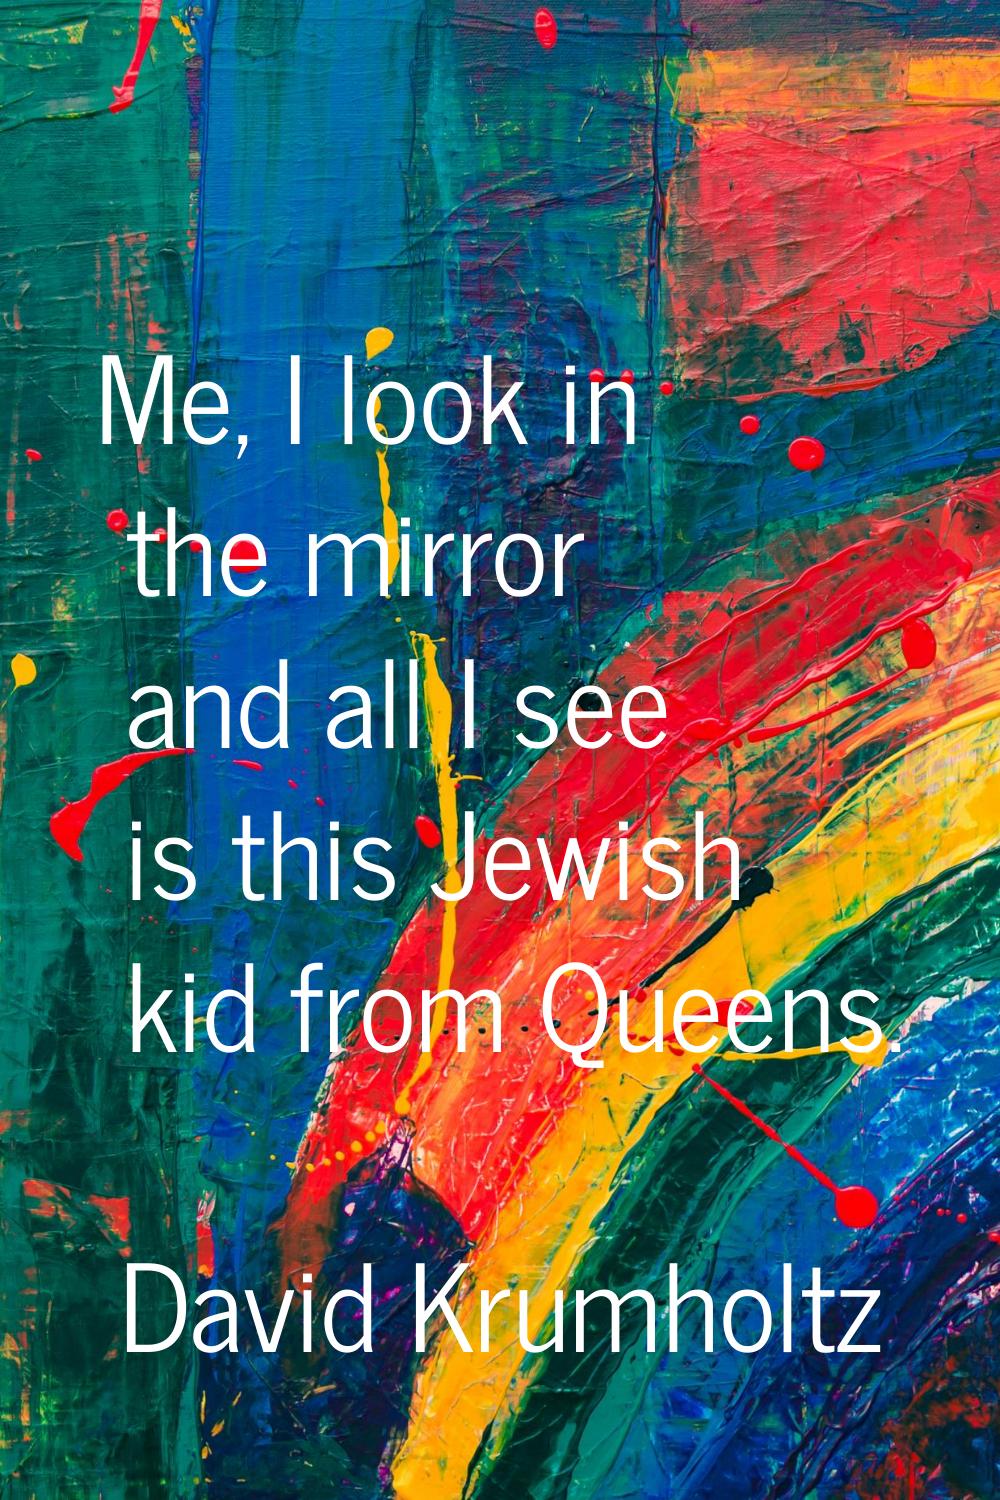 Me, I look in the mirror and all I see is this Jewish kid from Queens.